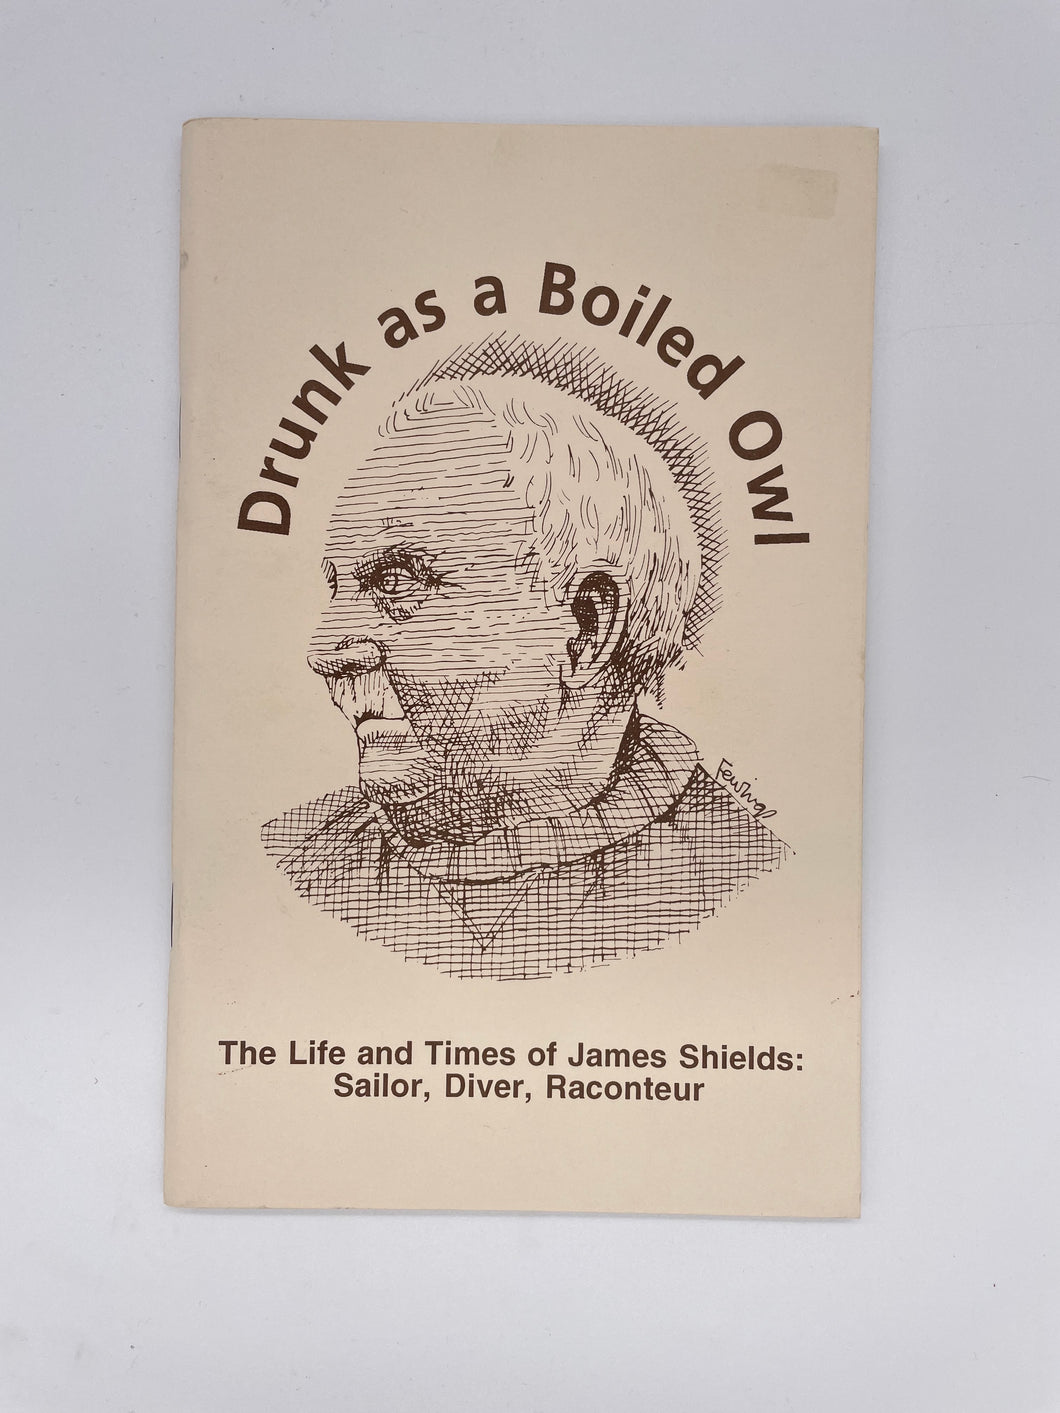 Drunk as a Boiled Owl: The Life and Times of James Shields Sailor, Diver, Raconteur